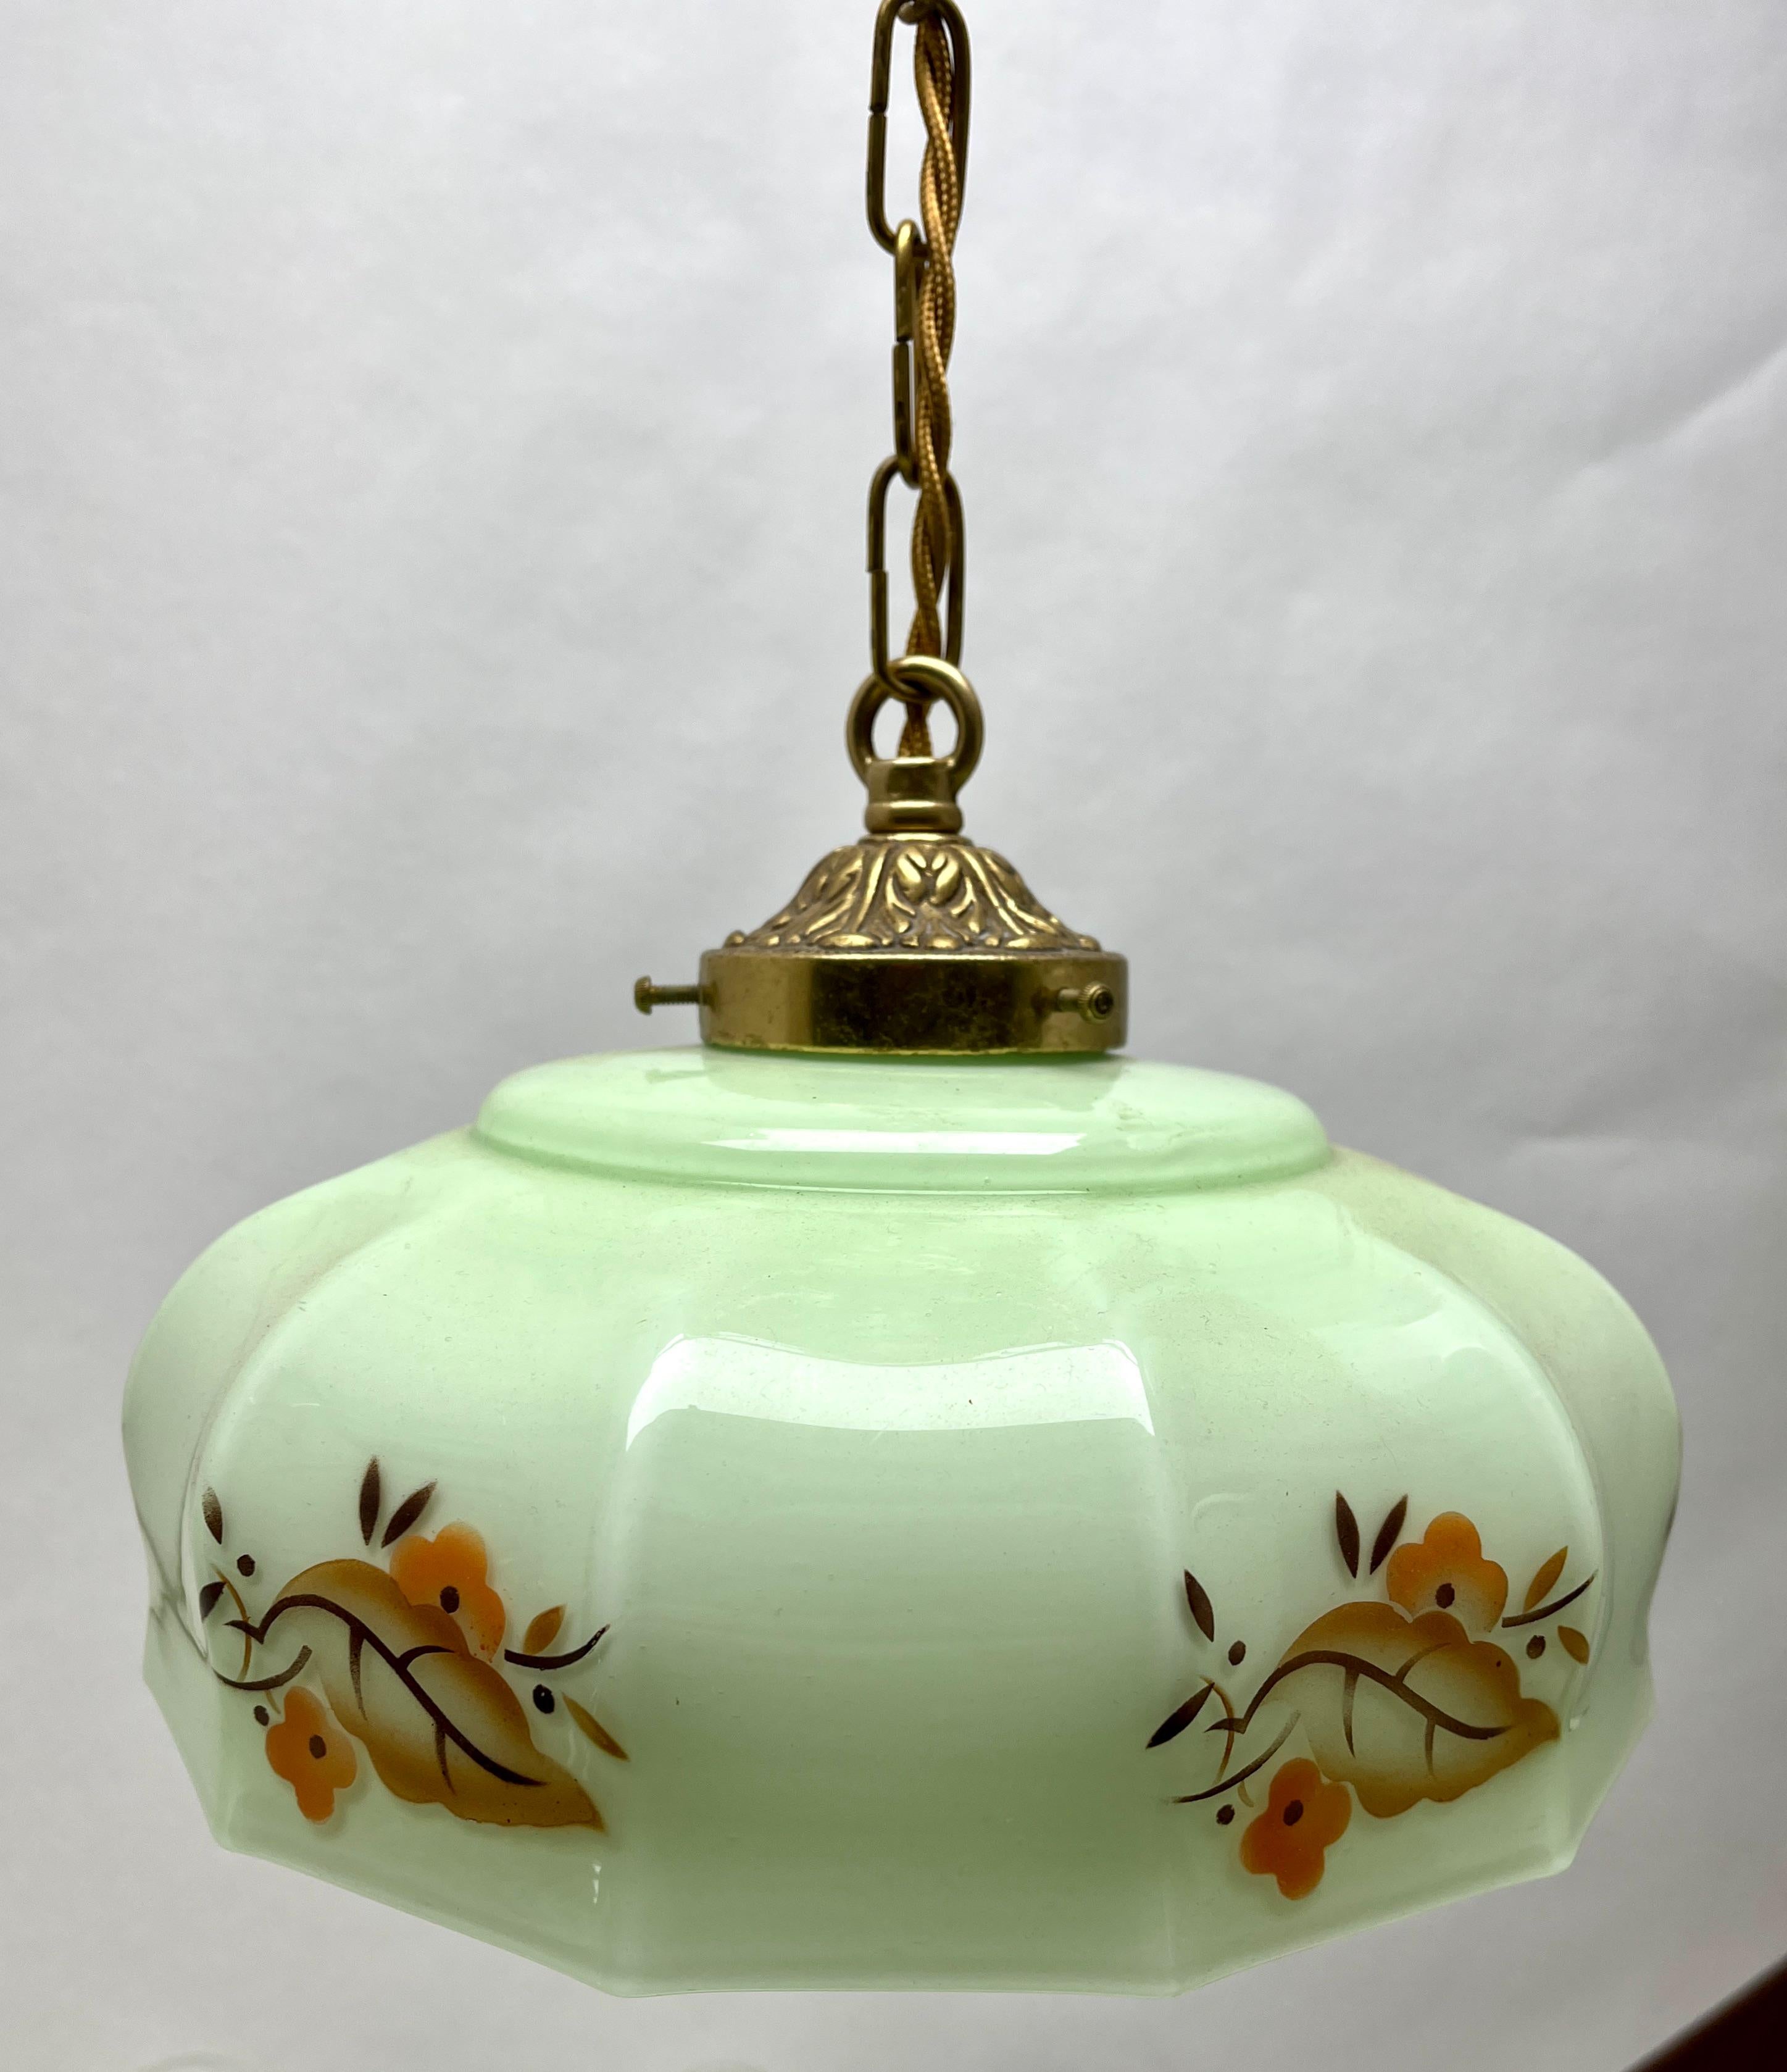 Art Nouveau ceiling lamp
Photography fails to capture the simple elegant illumination provided by this lamp.

Fitting messing pendant ceiling light with screw fixing to hold a stylish Belgian Art Deco lampshade. 
Good distribution of darker and